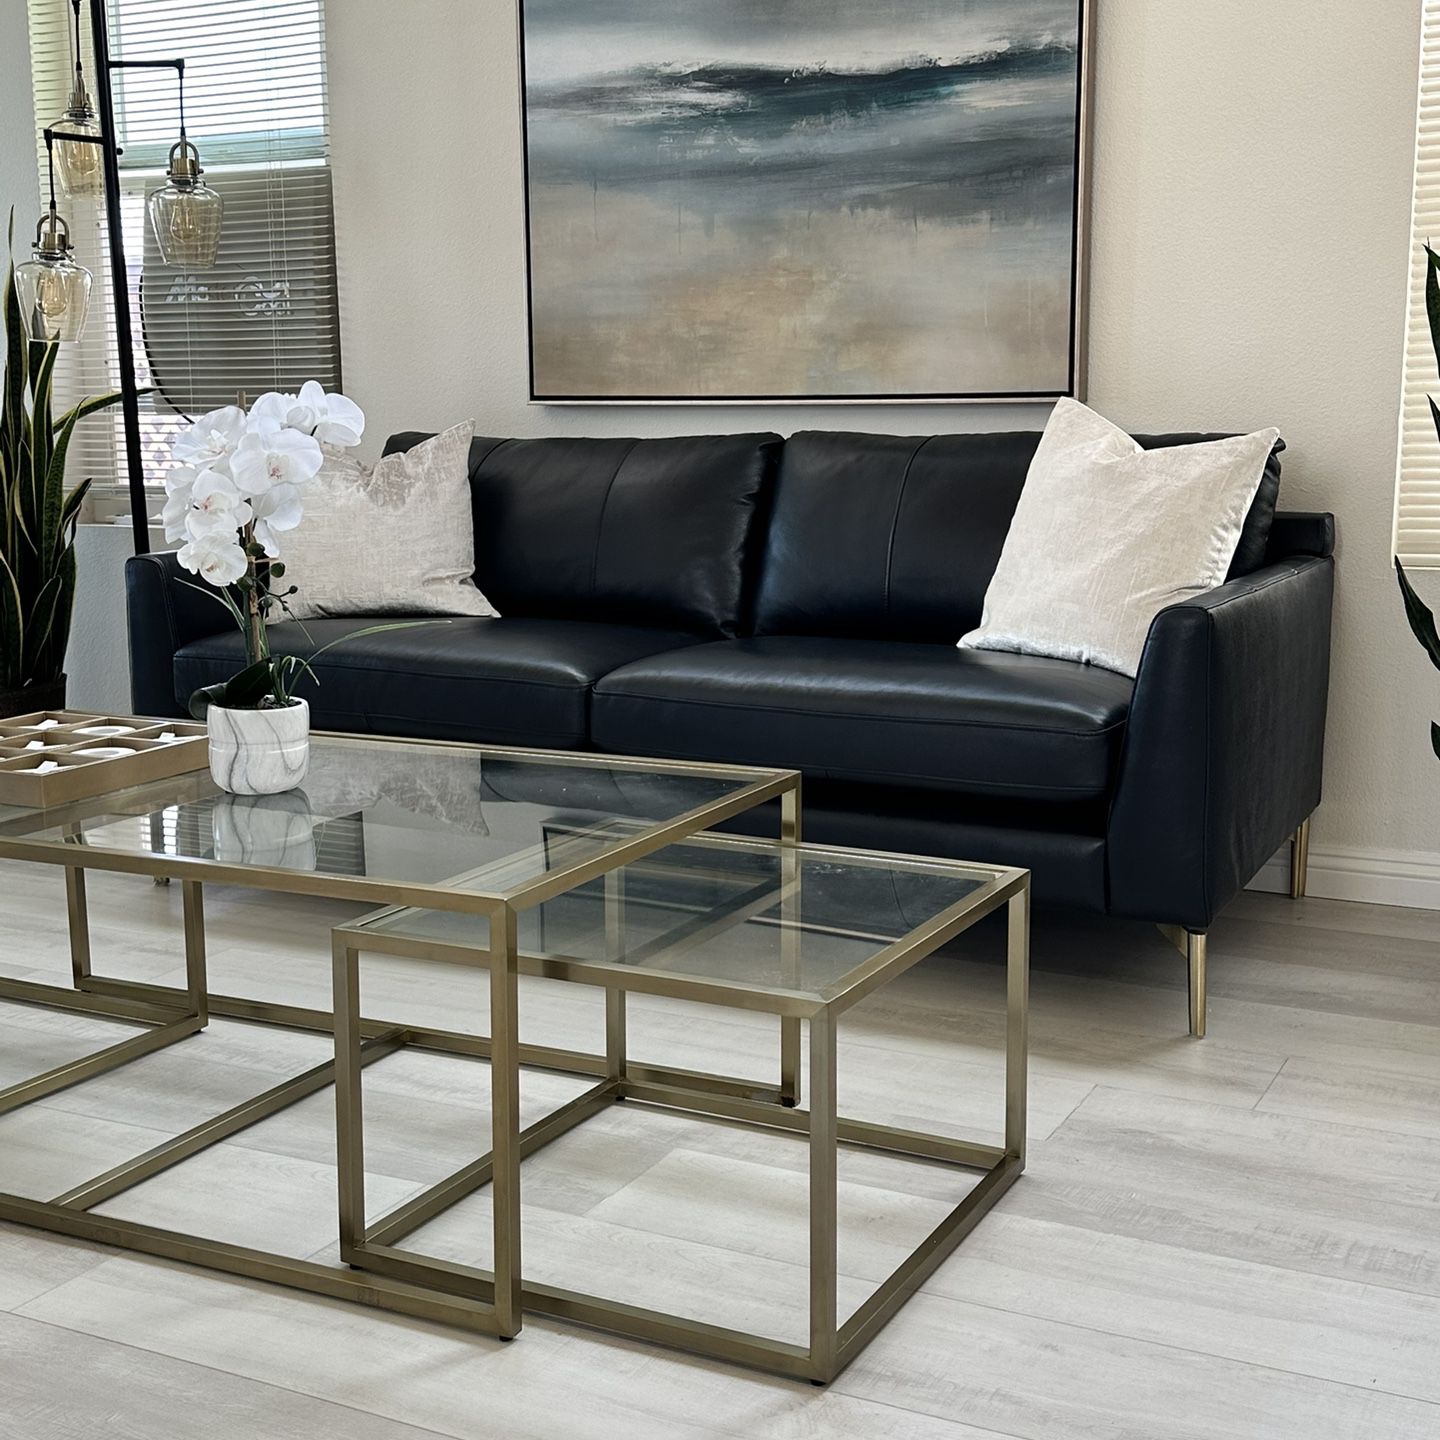 Gold Coffee Table Set (3pc)